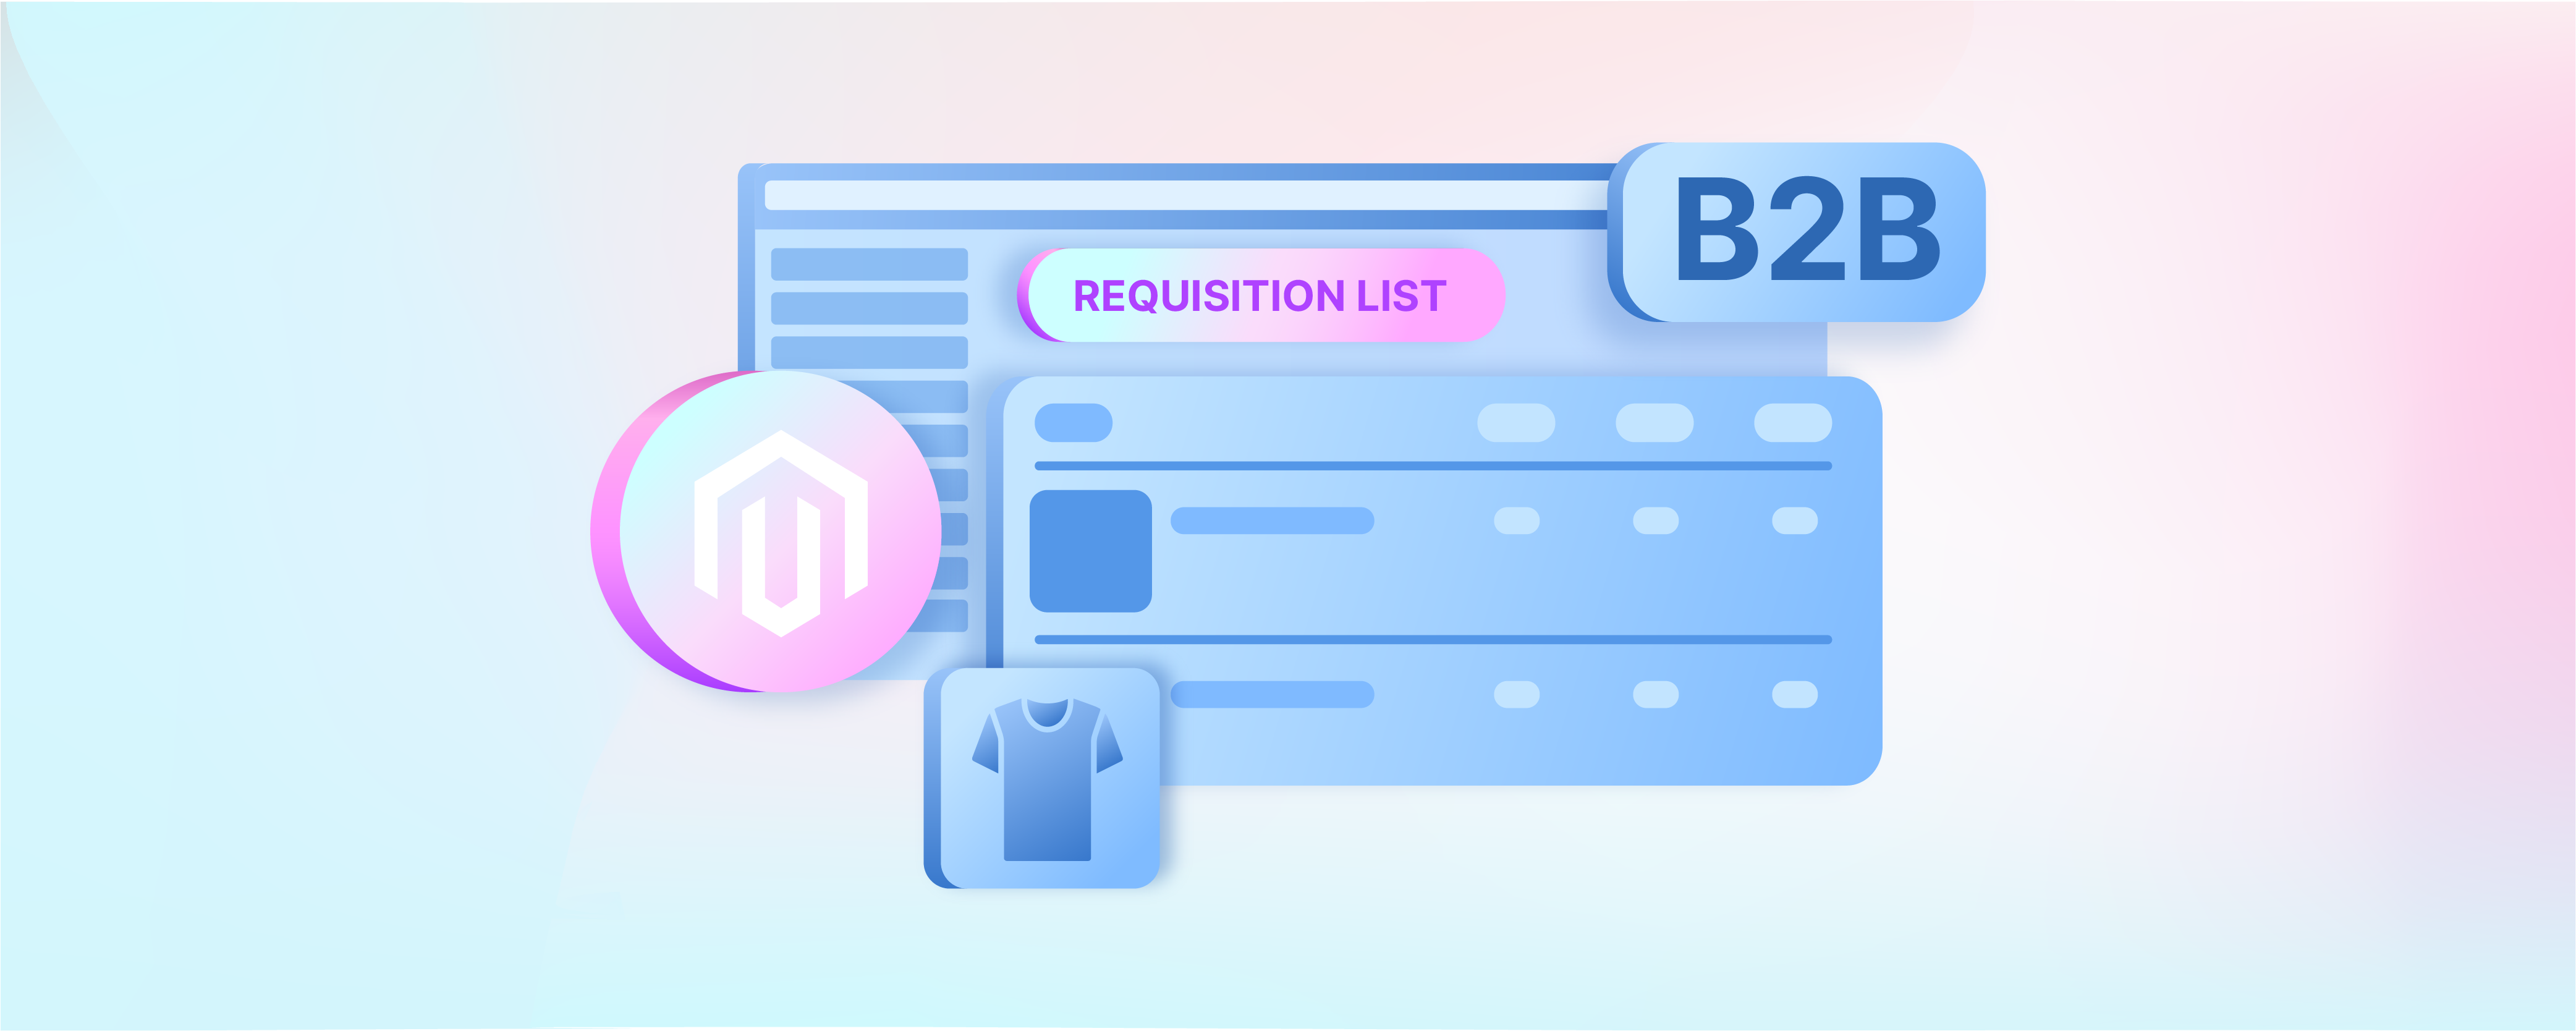 12 Steps to Configure Magento 2 B2B Requisition Lists